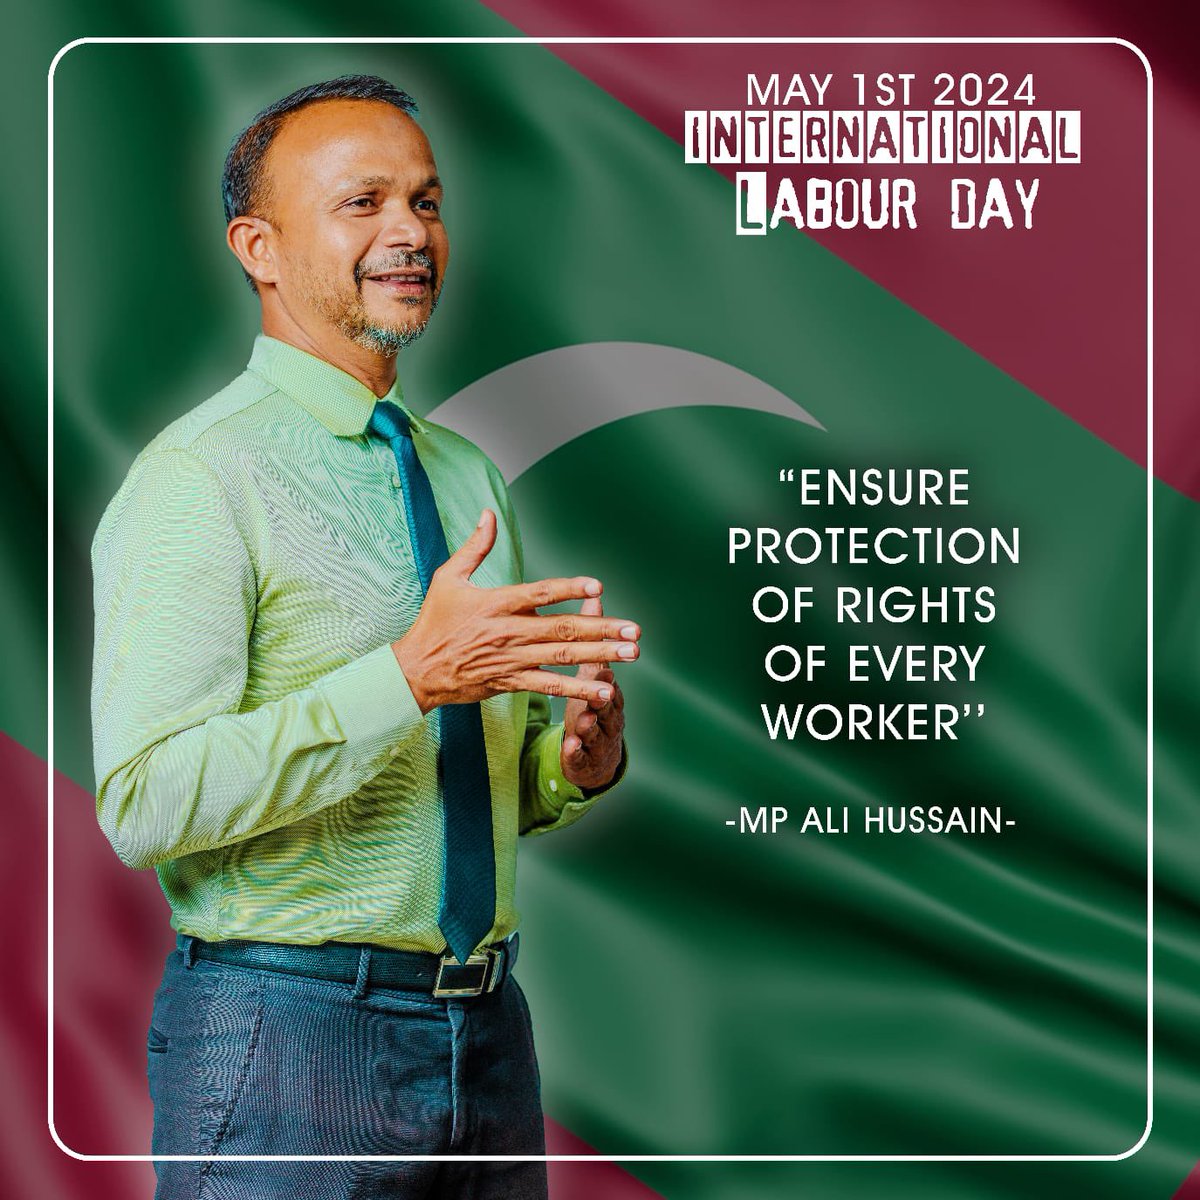 Ensuring the protection of the rights of every worker is fundamental for a better nation.